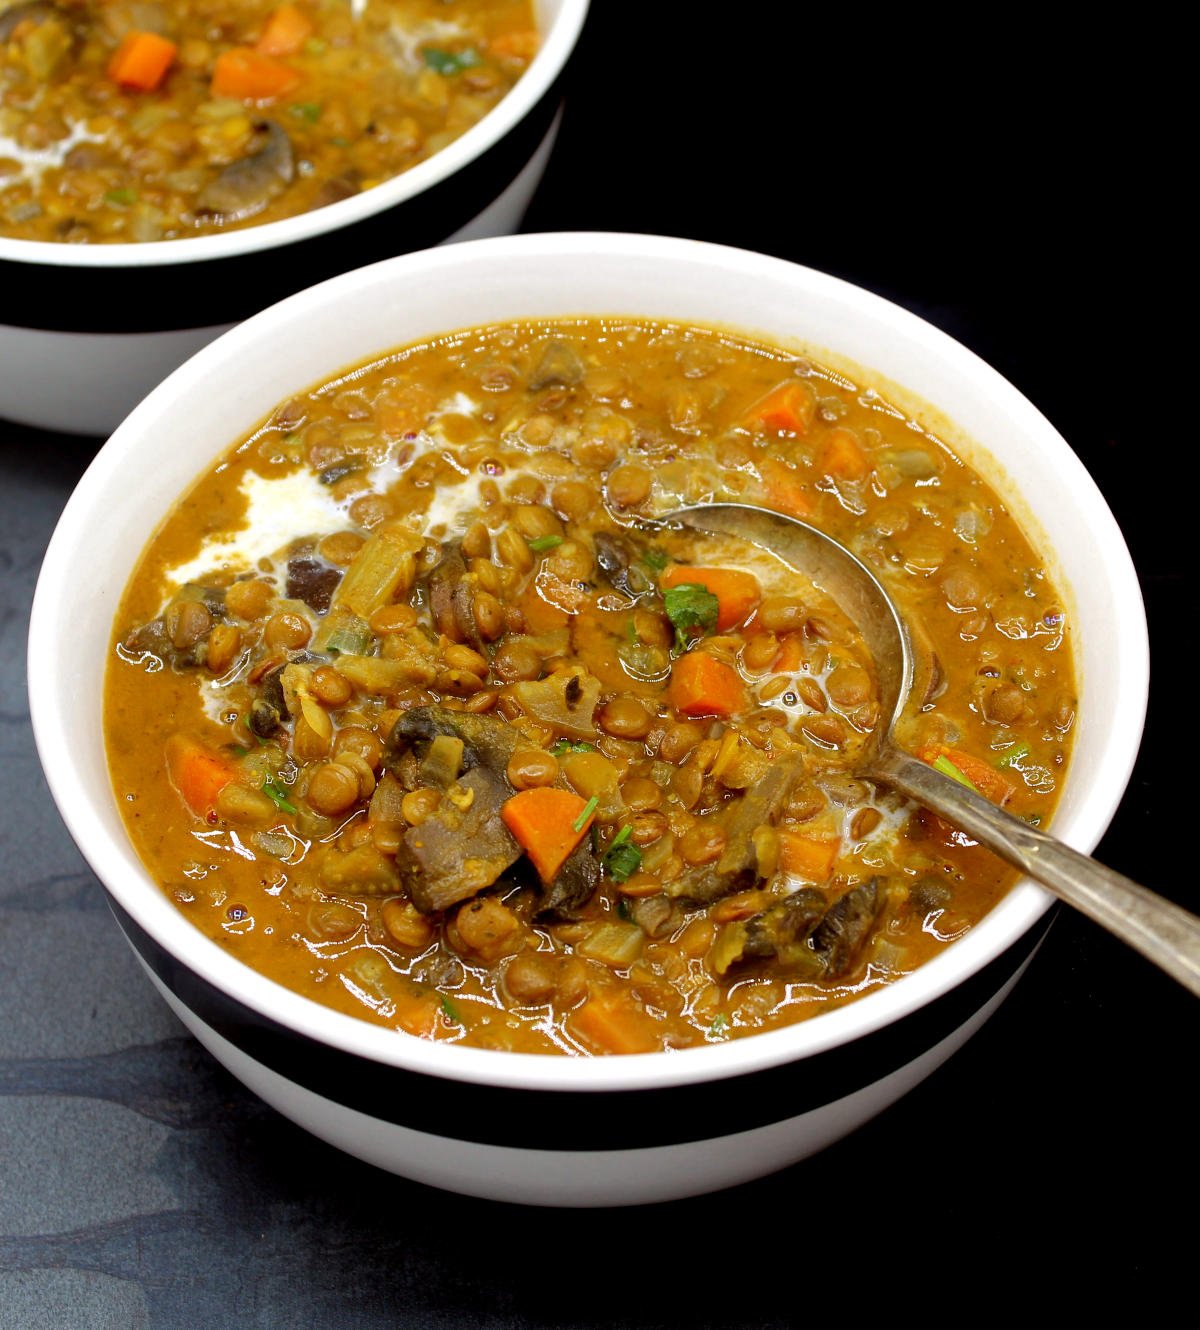 Front photo of a black and white bowl with creamy lentil soup with carrots, mushrooms, celery, onions, cilantro and brown lentils.